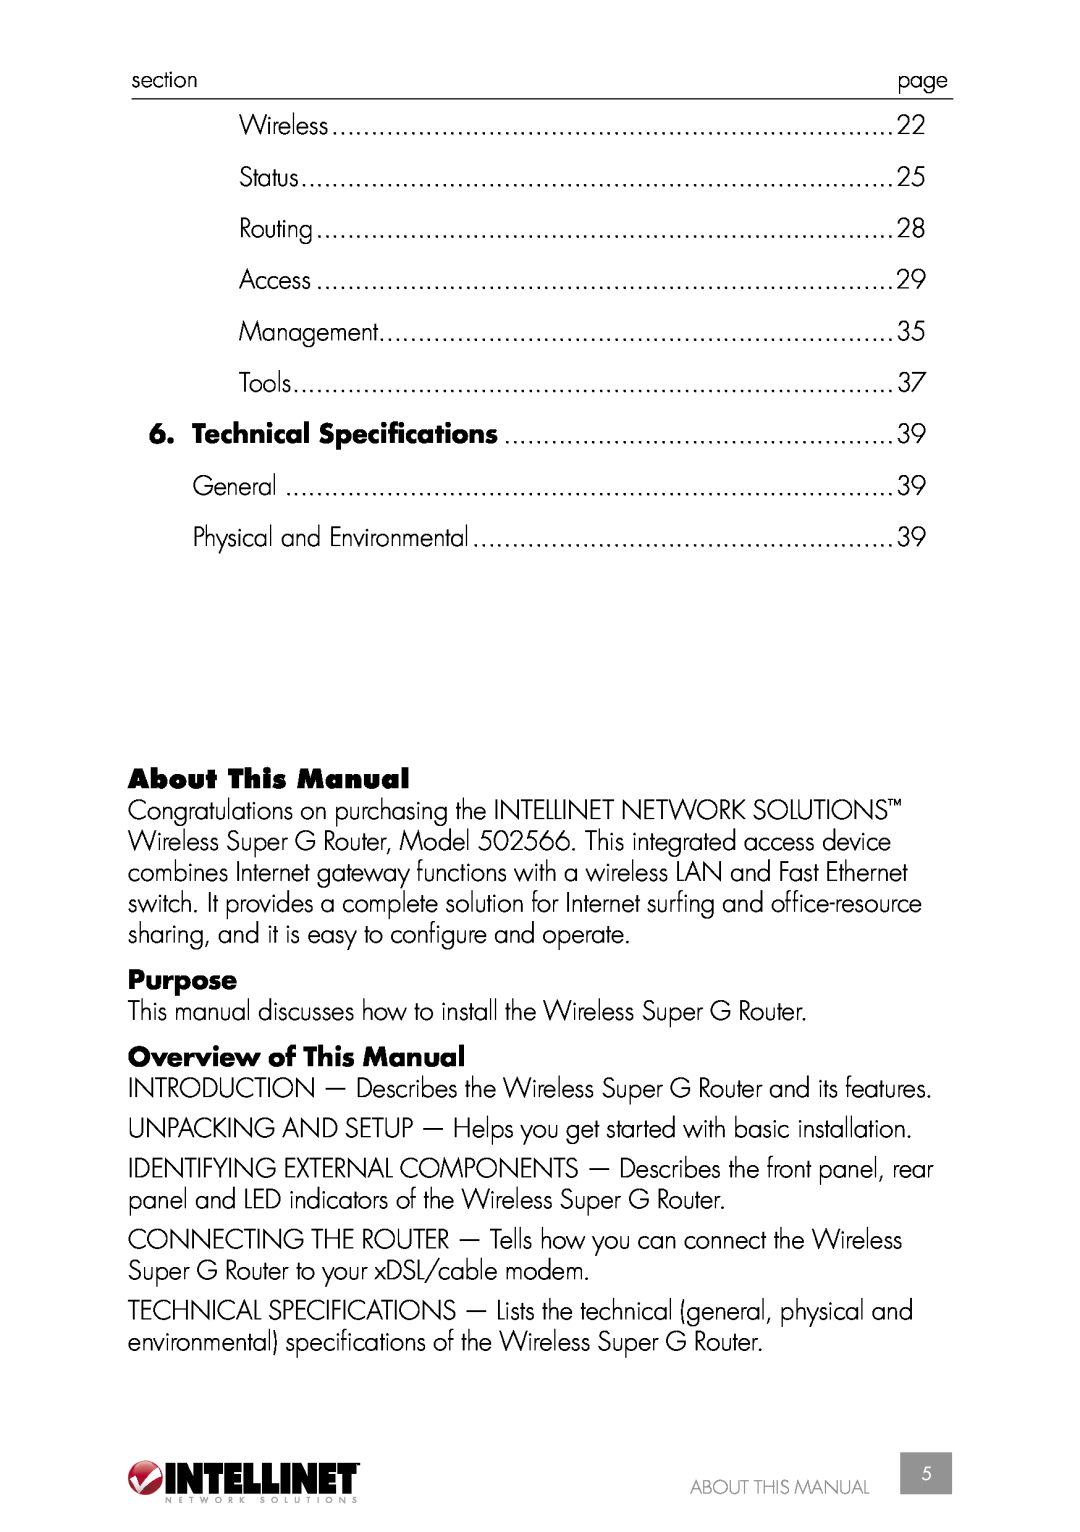 Intellinet Network Solutions 502566 manual About This Manual, Purpose, Overview of This Manual 